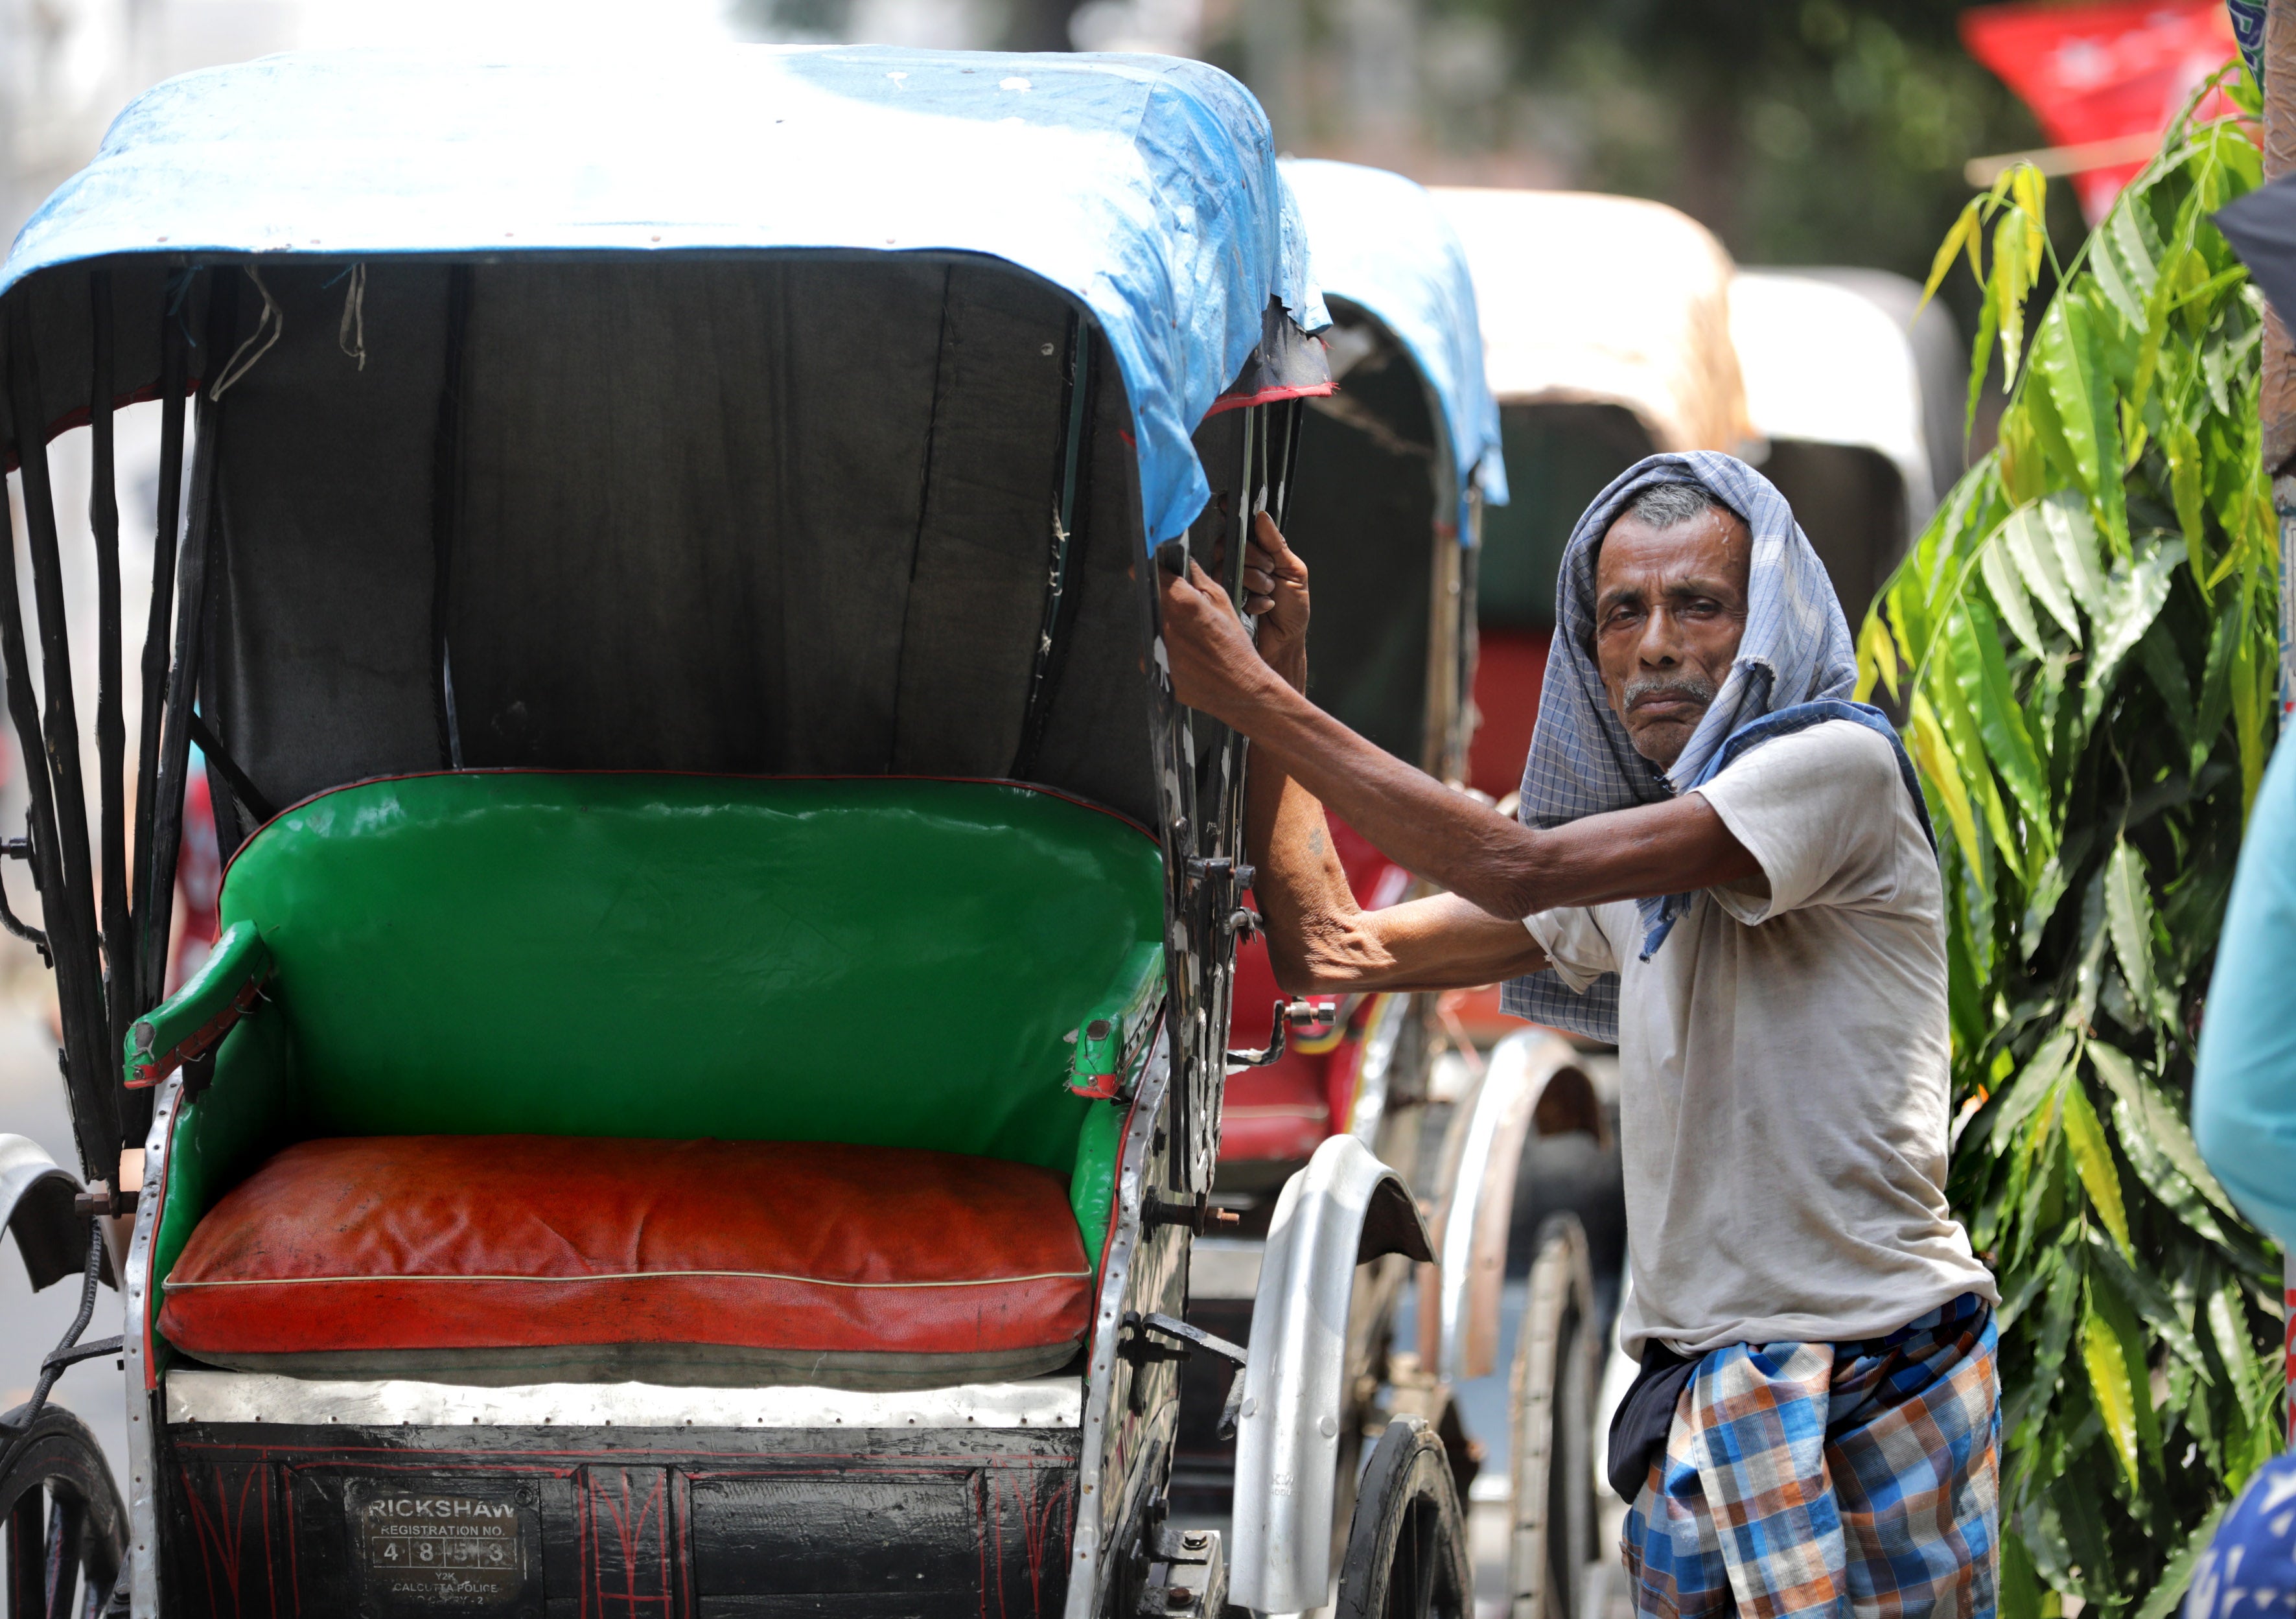 An Indian rikshaw puller waits during a hot afternoon in Kolkata, eastern India, 19 April 2022